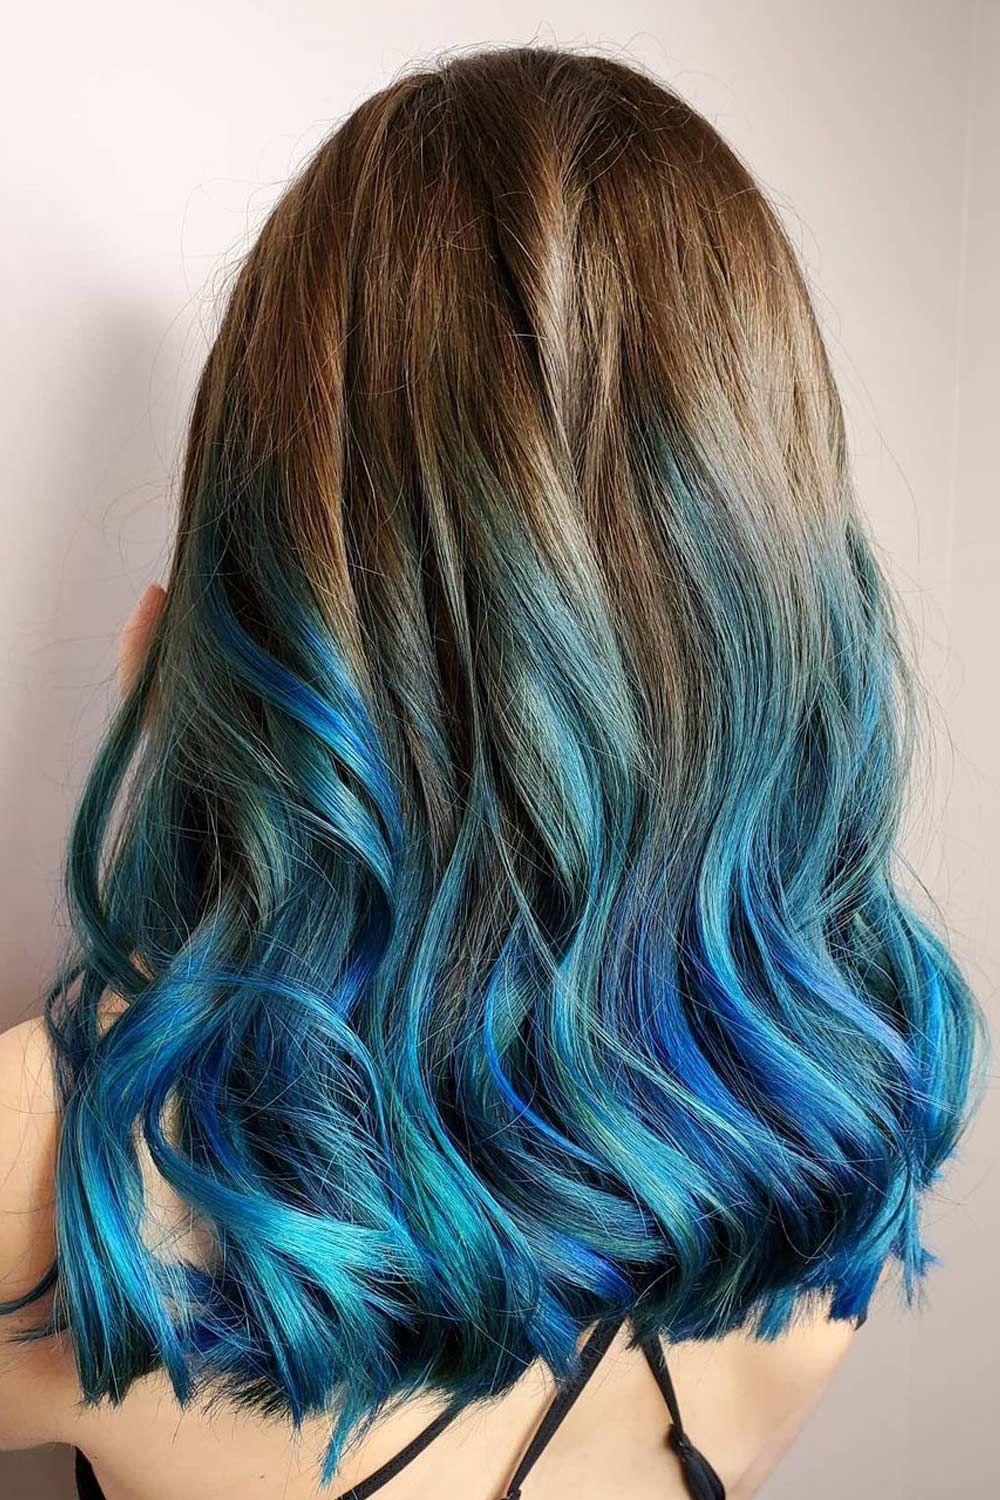 50 Summer Hair Color Options To Make It Hot